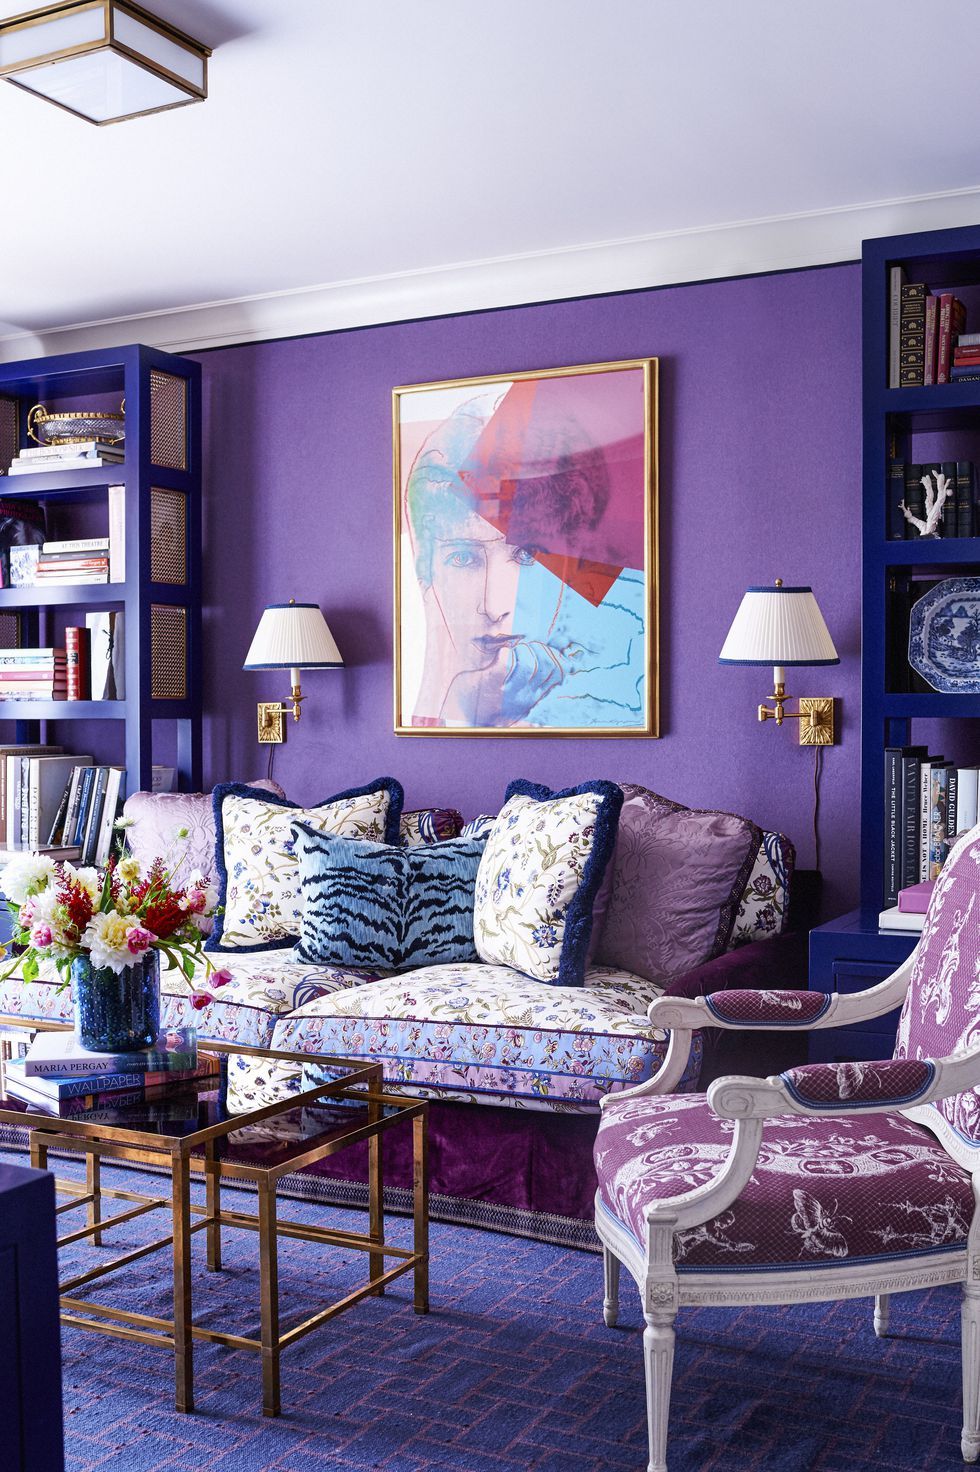 Analogous Colors and How to Use Them in Your Home